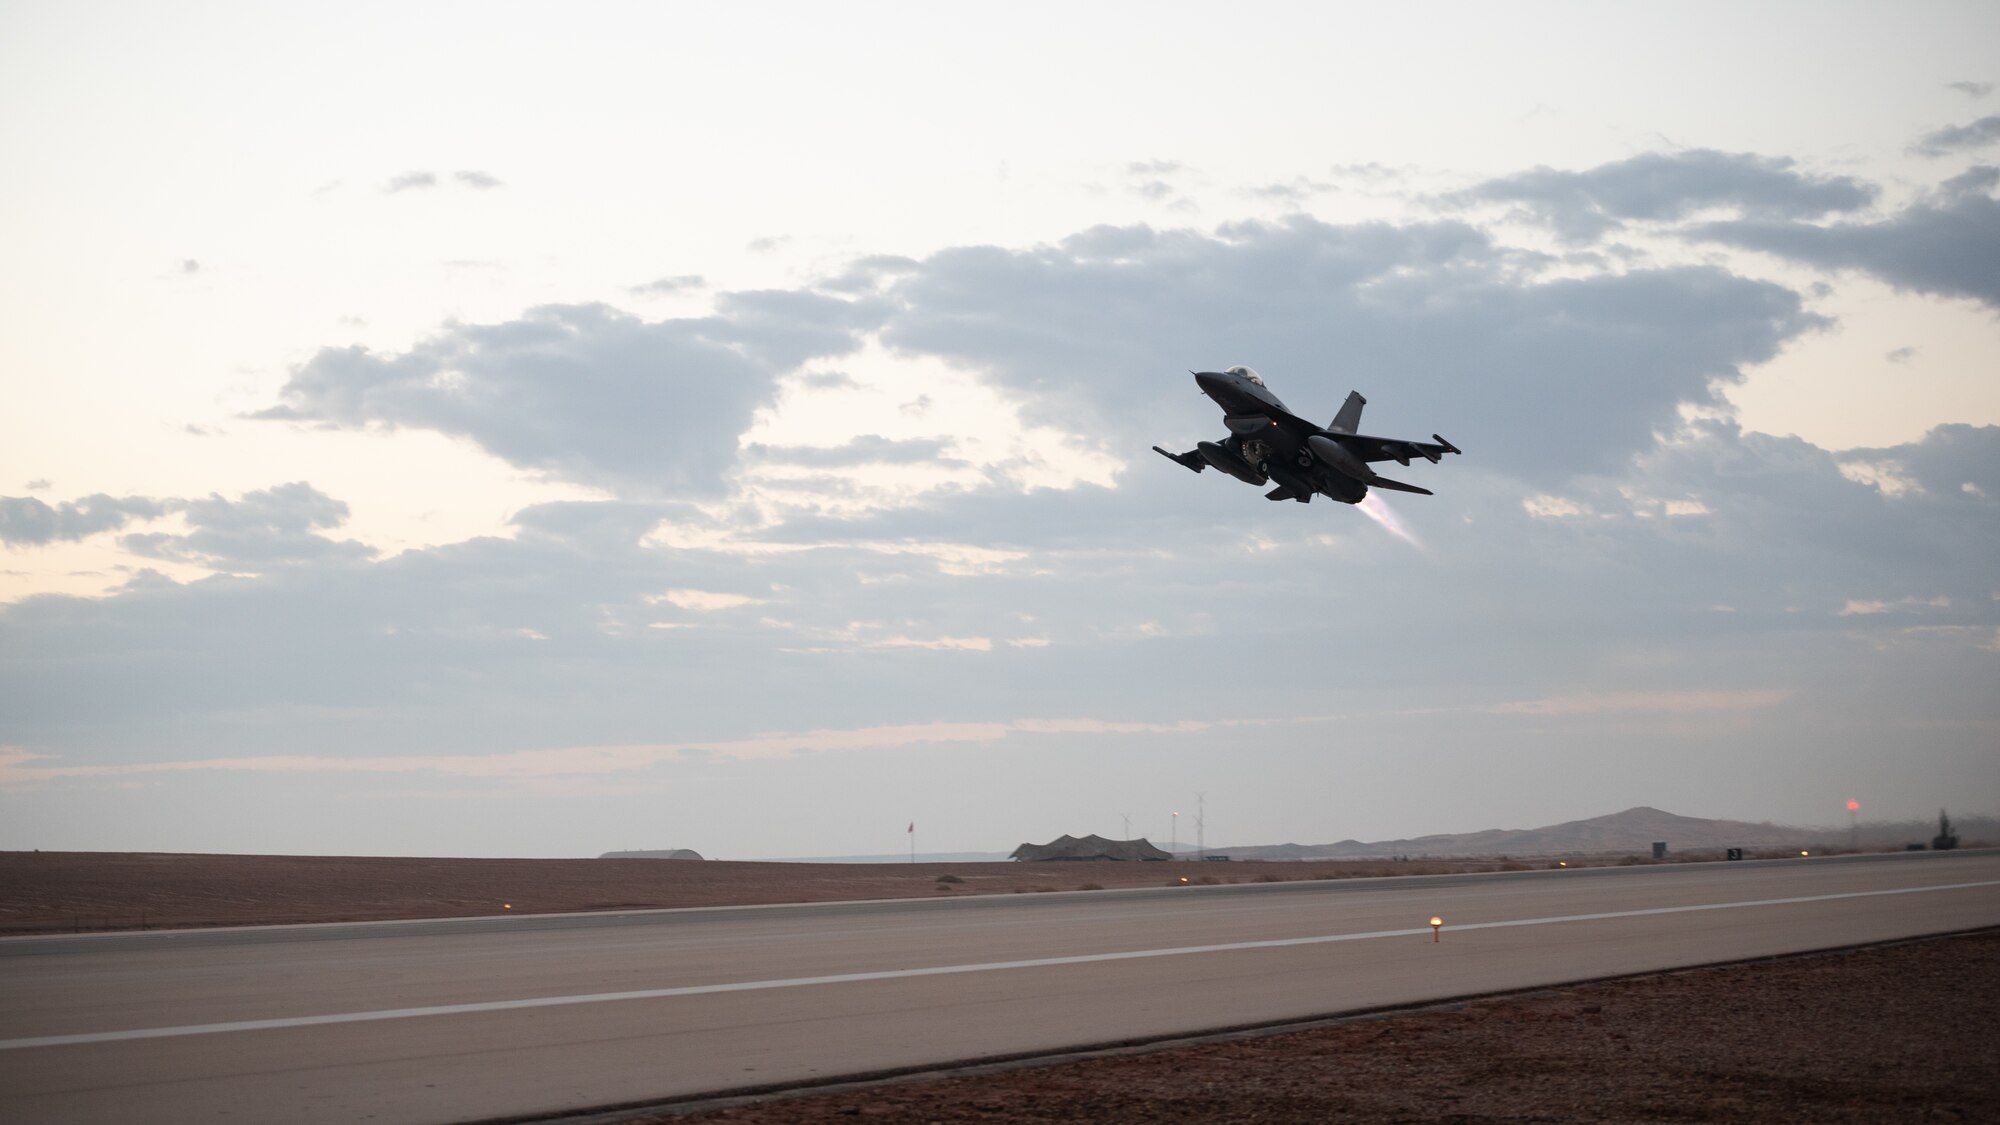 A U.S. Air Force F-16 Fighting Falcon takes off from Prince Sultan Air Base, Kingdom of Saudi Arabia, Jan. 4, 2022, to participate in joint interoperability training with a variety of aircraft, to include U.S. Air Force E-11A Battlefield Airborne Communications Node (BACN) and U.S. Marine F/A-18 Hornets. Complex missions such as these increase aircrew’s abilities across U.S. Central Command’s area of responsibility, ultimately strengthening the lethality of the total force. (U.S. Air Force photo by Senior Airman Jacob B. Wrightsman)